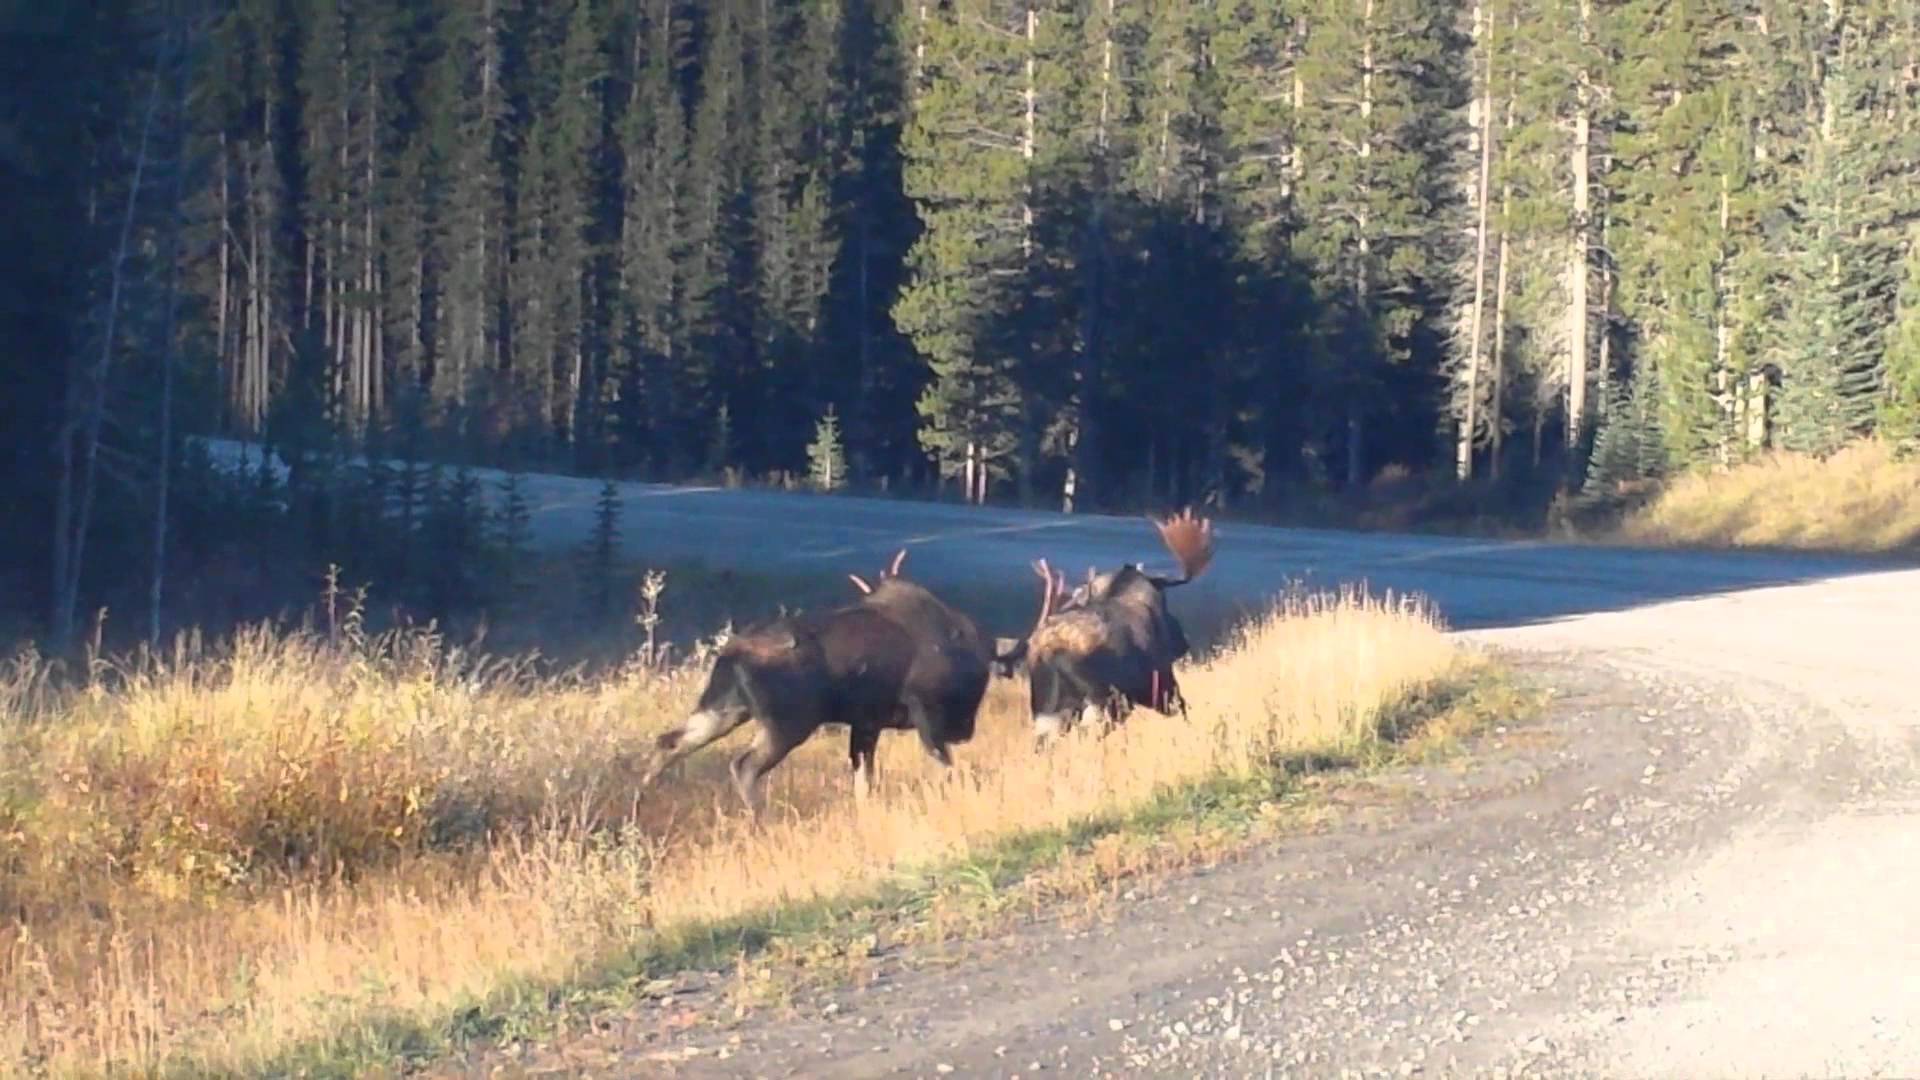 Best Moose Fight! Rutting bull moose have a fight. - YouTube